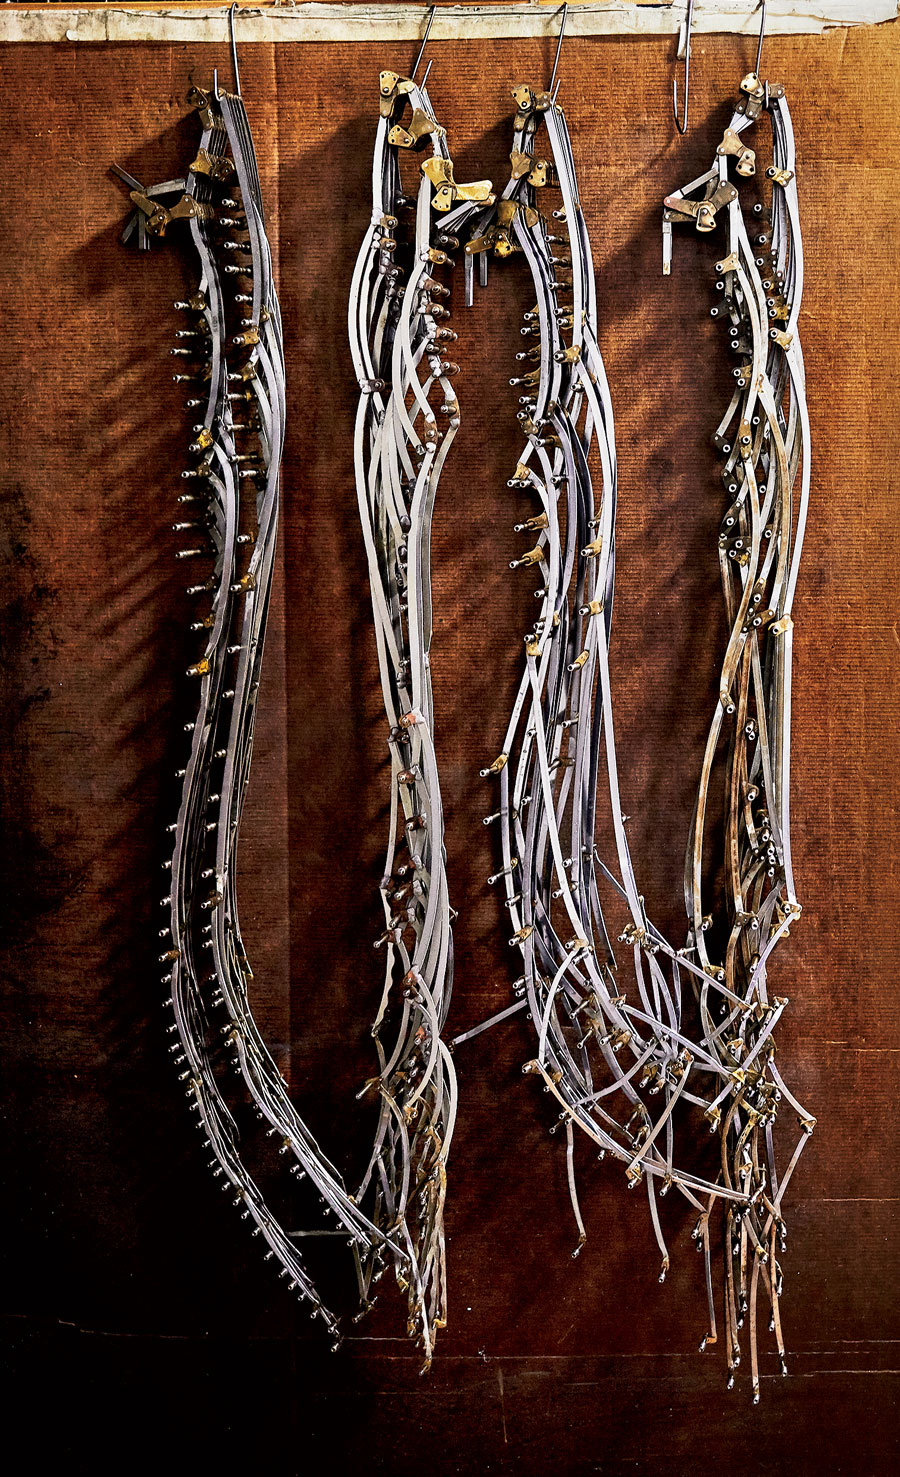 Linkages, the delicate bones that make the mechanism work, dangle from hooks on the wall.